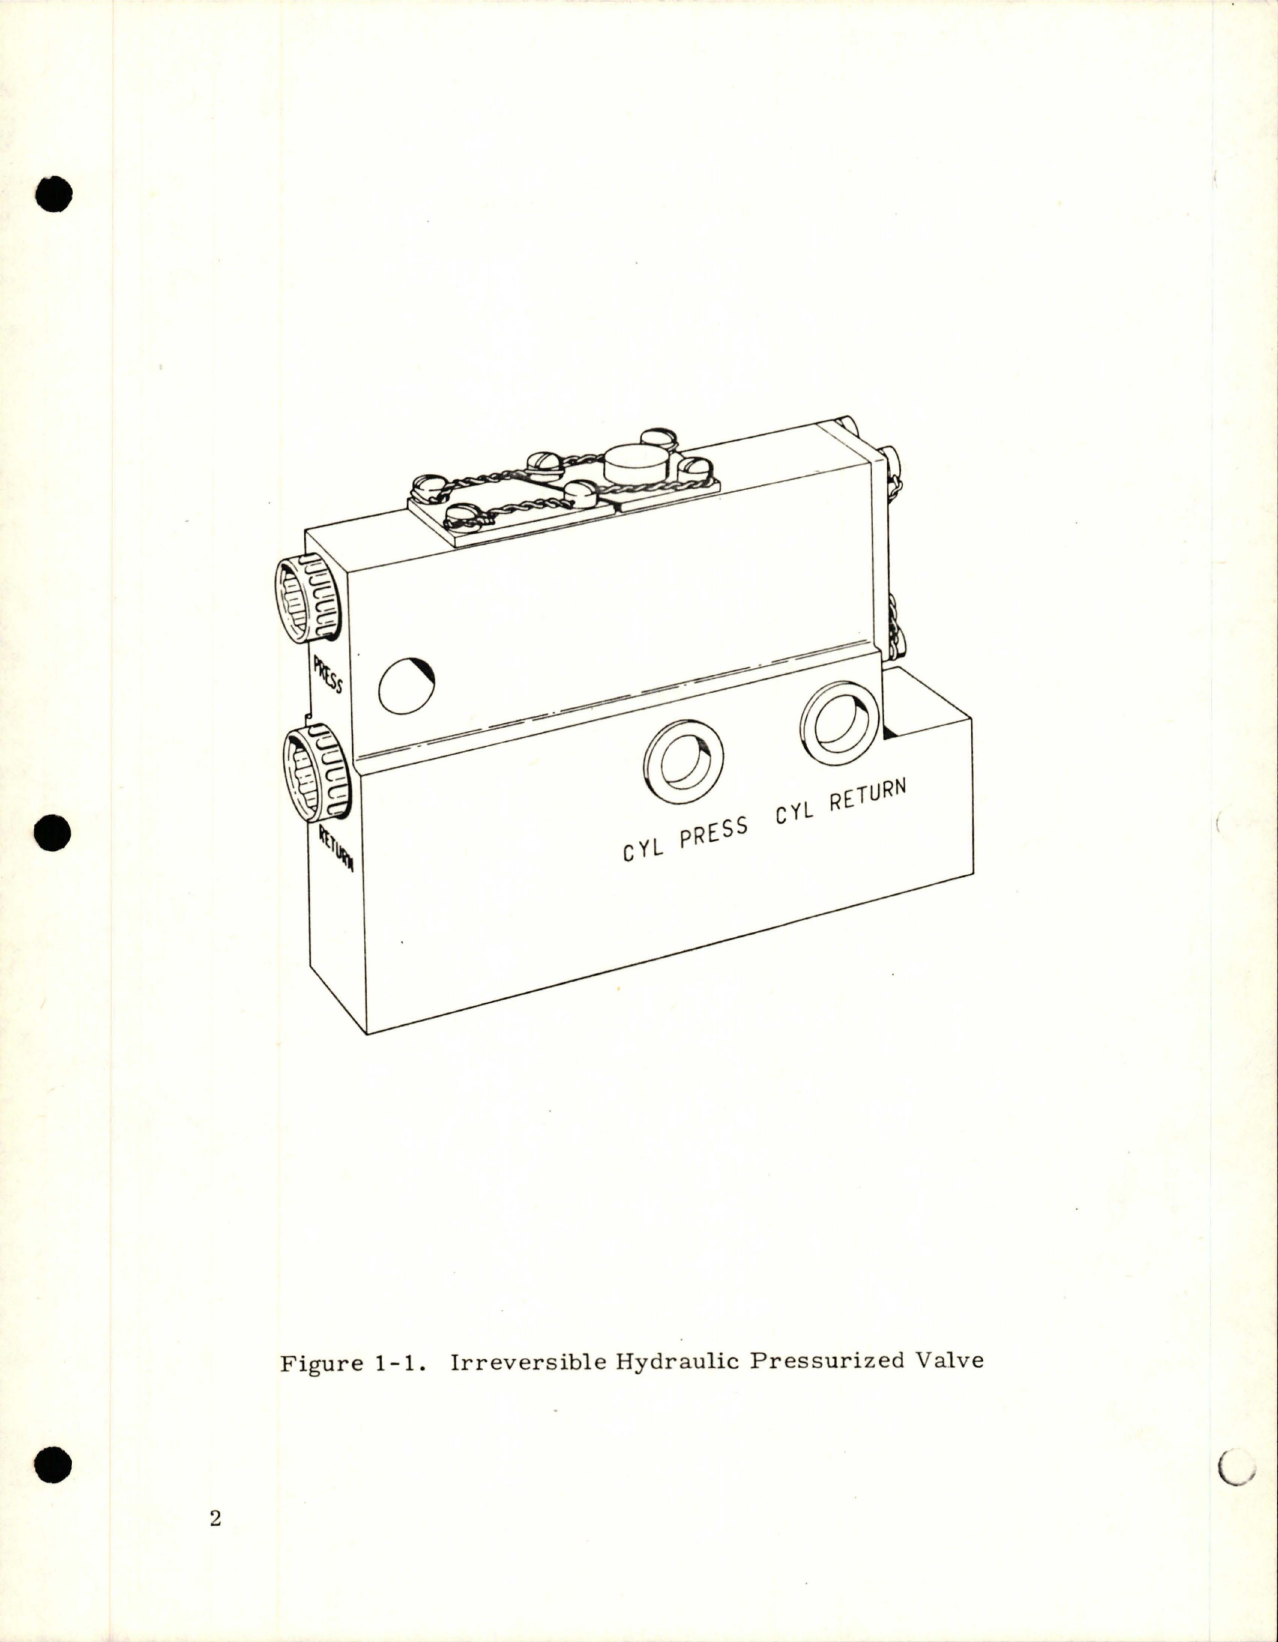 Sample page 5 from AirCorps Library document: Overhaul with Illustrated Parts Breakdown for Irreversible Hydraulic Pressurized Valve - Part 42550